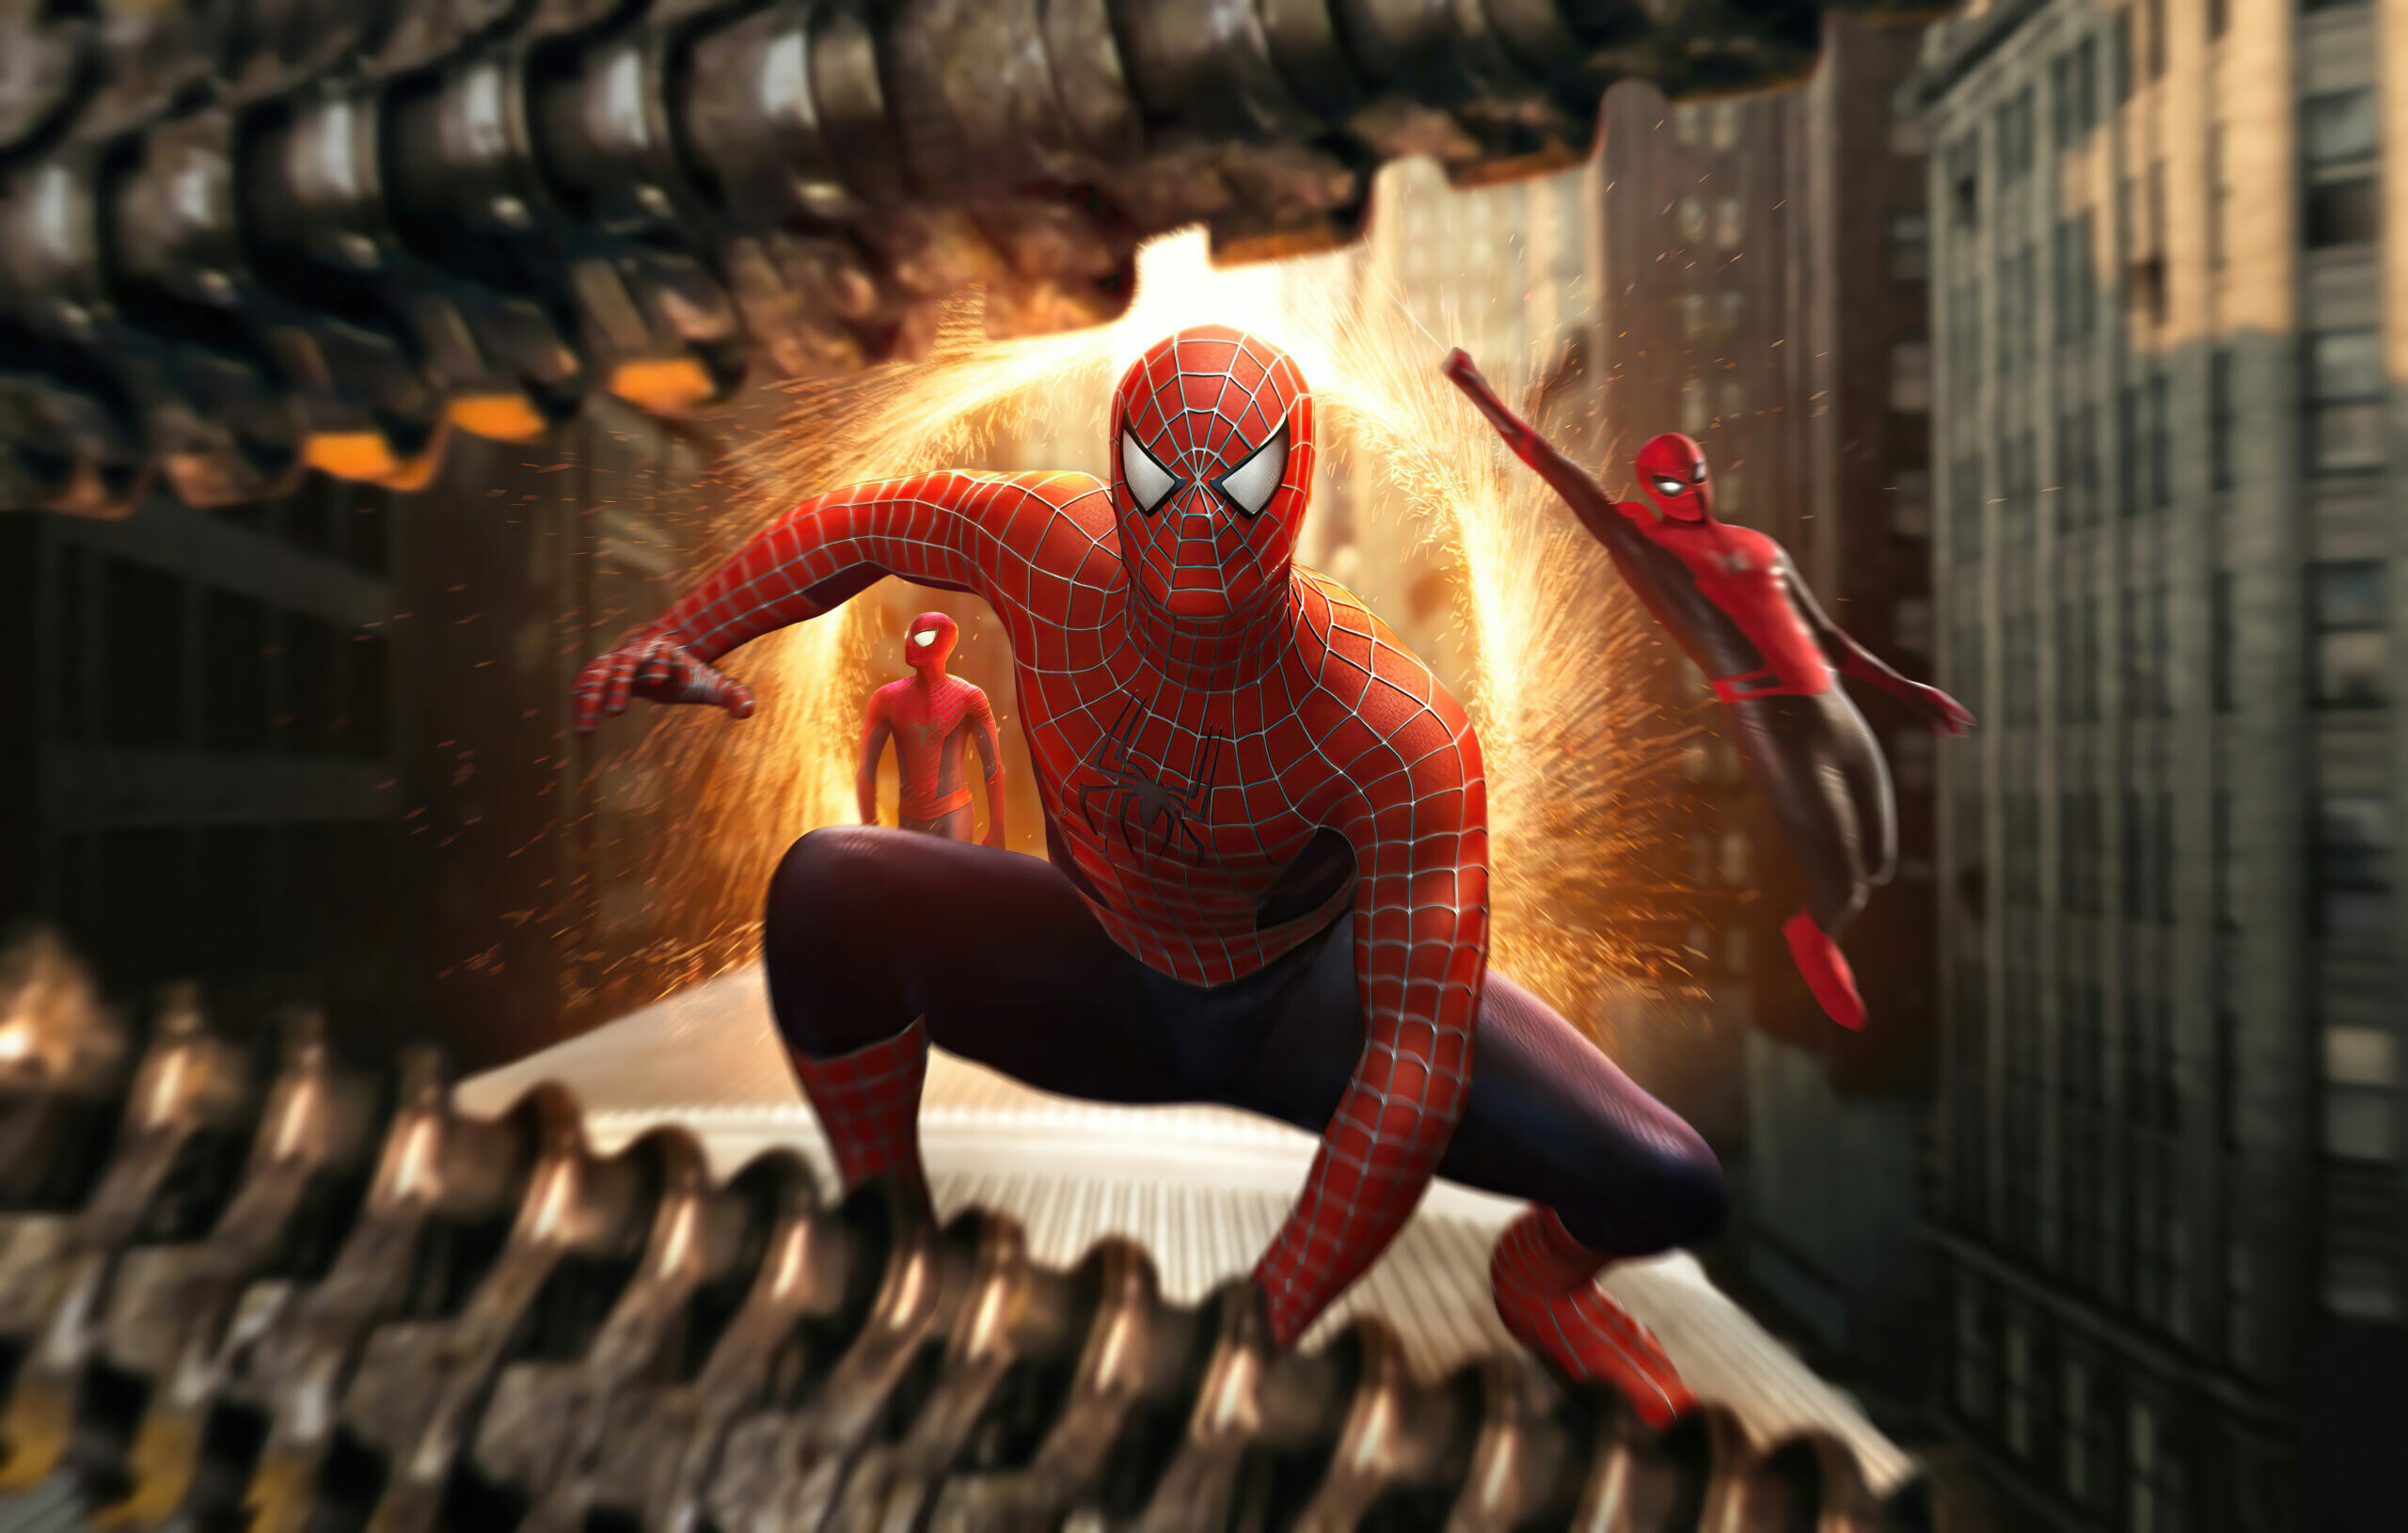 Spider-Man: No Way Home: Andrew Garfield, Tobey Maguire, and Tom Holland, 2021 movie. 2560x1630 HD Wallpaper.